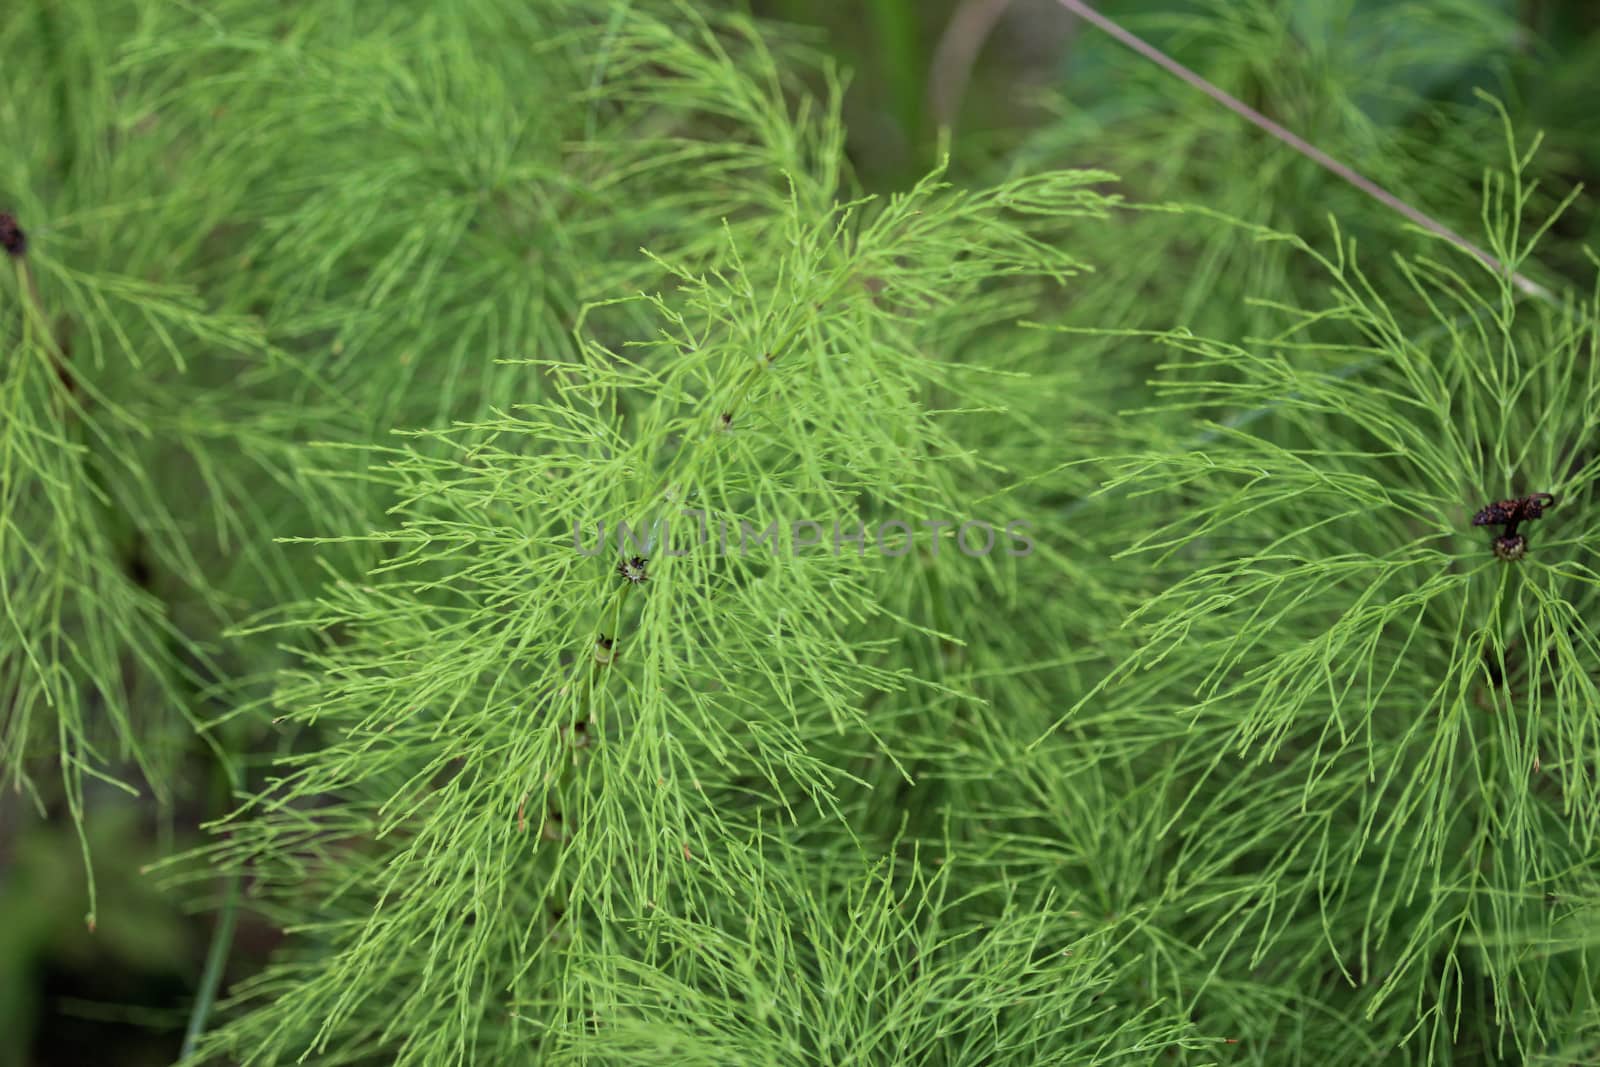 Close up of Equisetum sylvaticum, the wood horsetail, growing in the forest